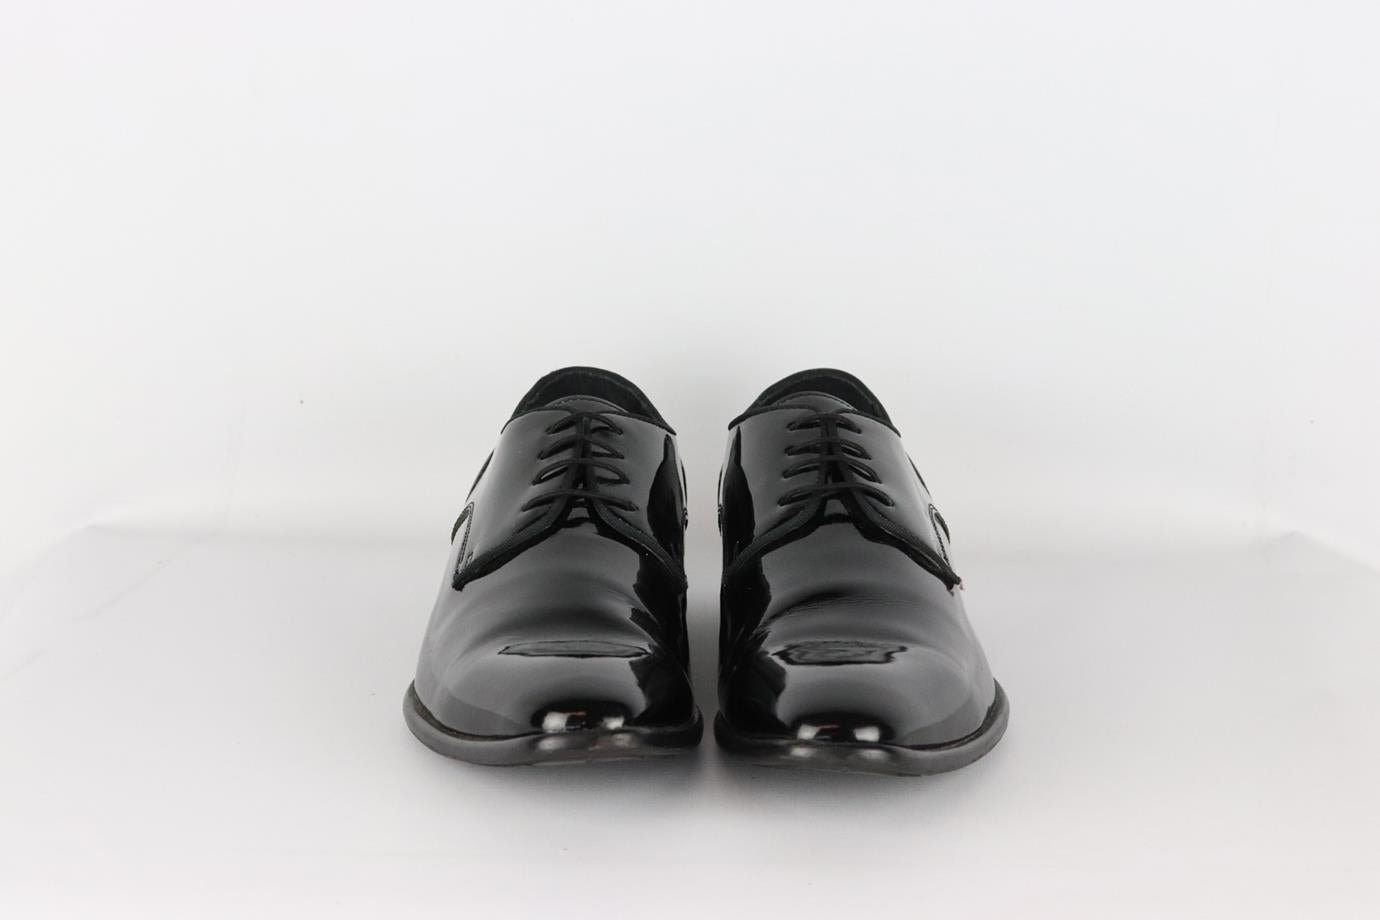 KENNETH COLE MEN'S PATENT LEATHER OXFORD SHOES EU 45.5 UK 11.5 US 12.5